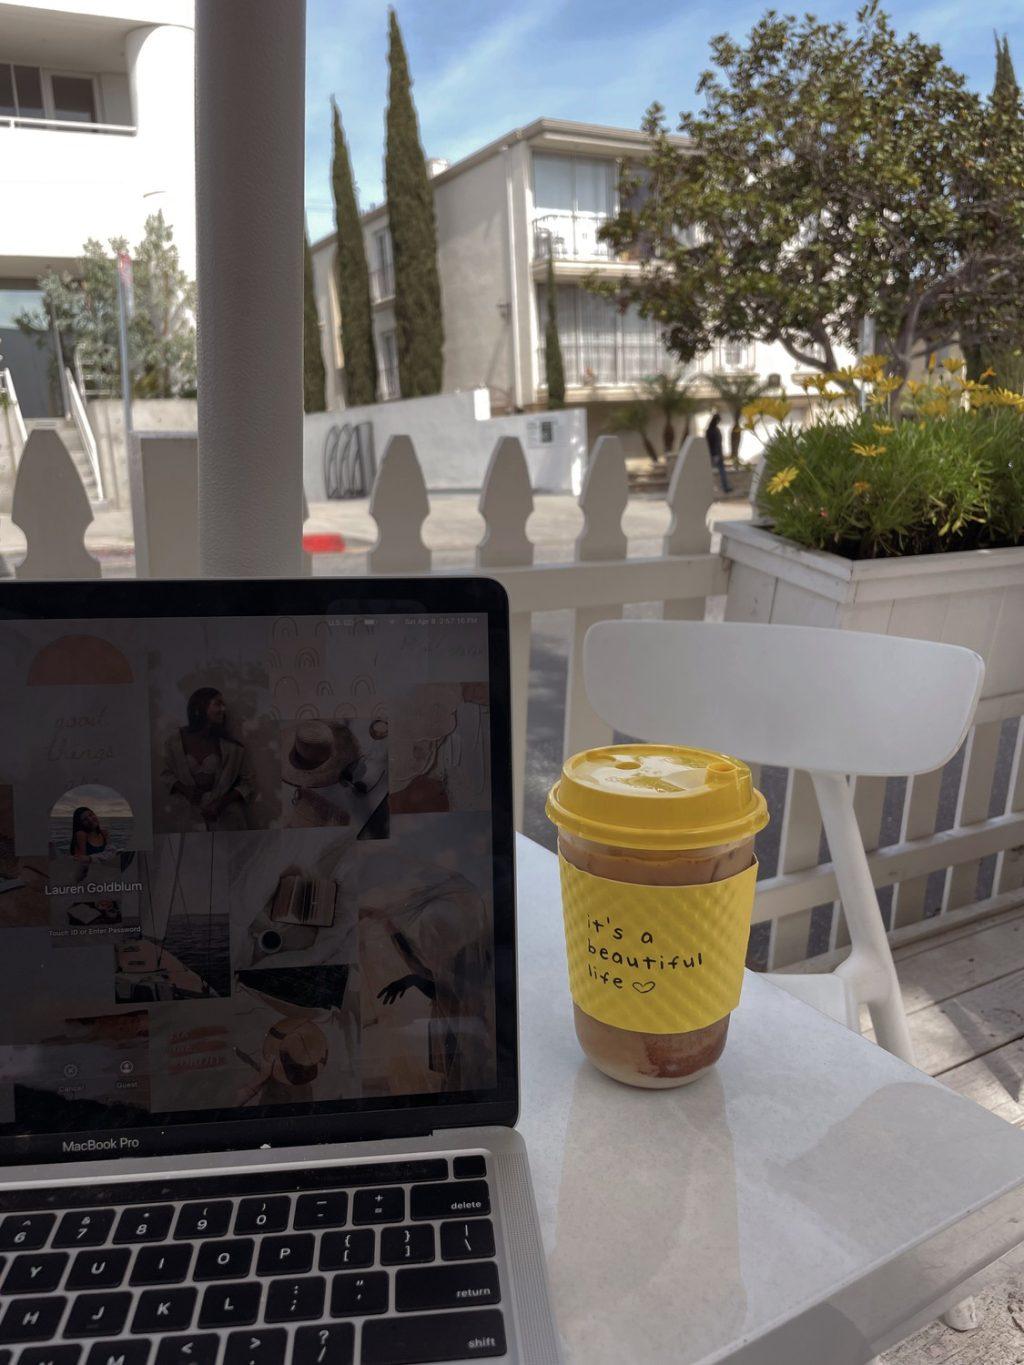 Sunshine makes for the perfect day to study or read at La La Land's outdoor patio April 8. The cafe is pet-friendly which allowed customers to bring their pets along with them on their coffee runs.